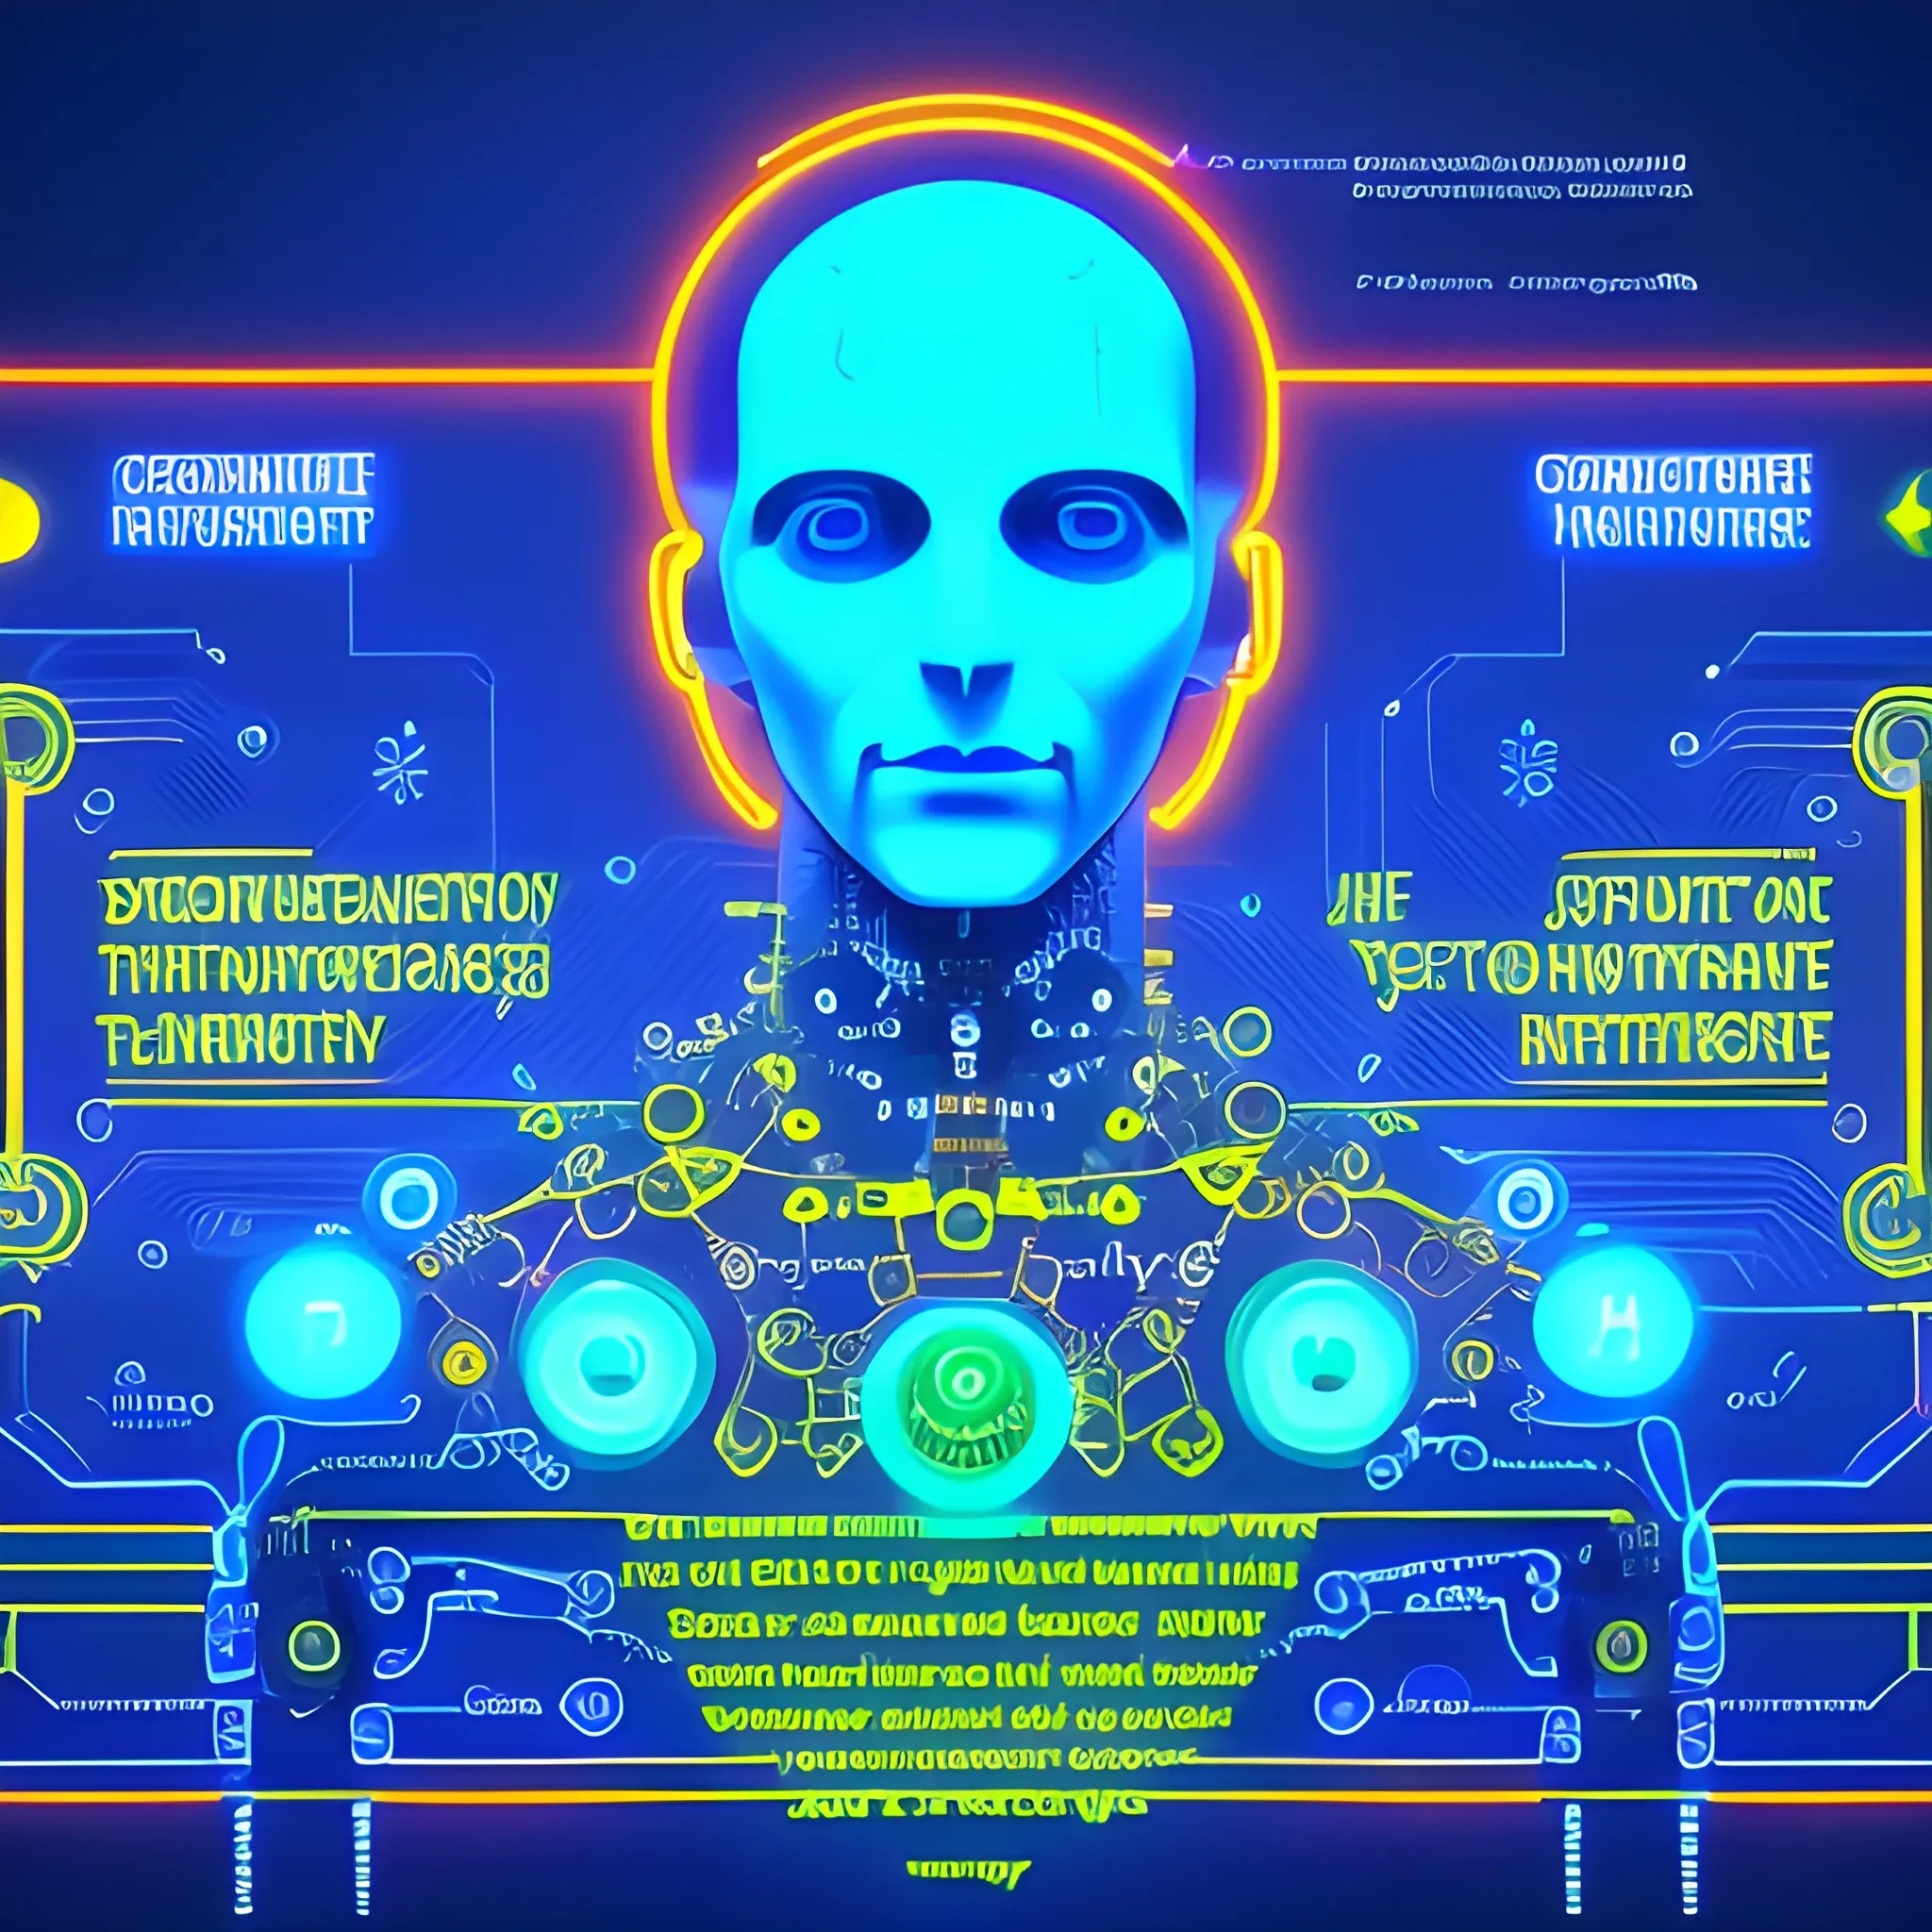 “Generate a corporative, future, colorful, modern image, trippy, related to digital products, do not use machines or txt and use really environment, with this concept: “Ai, ethics and the history of technology with the human representación”., Trippy